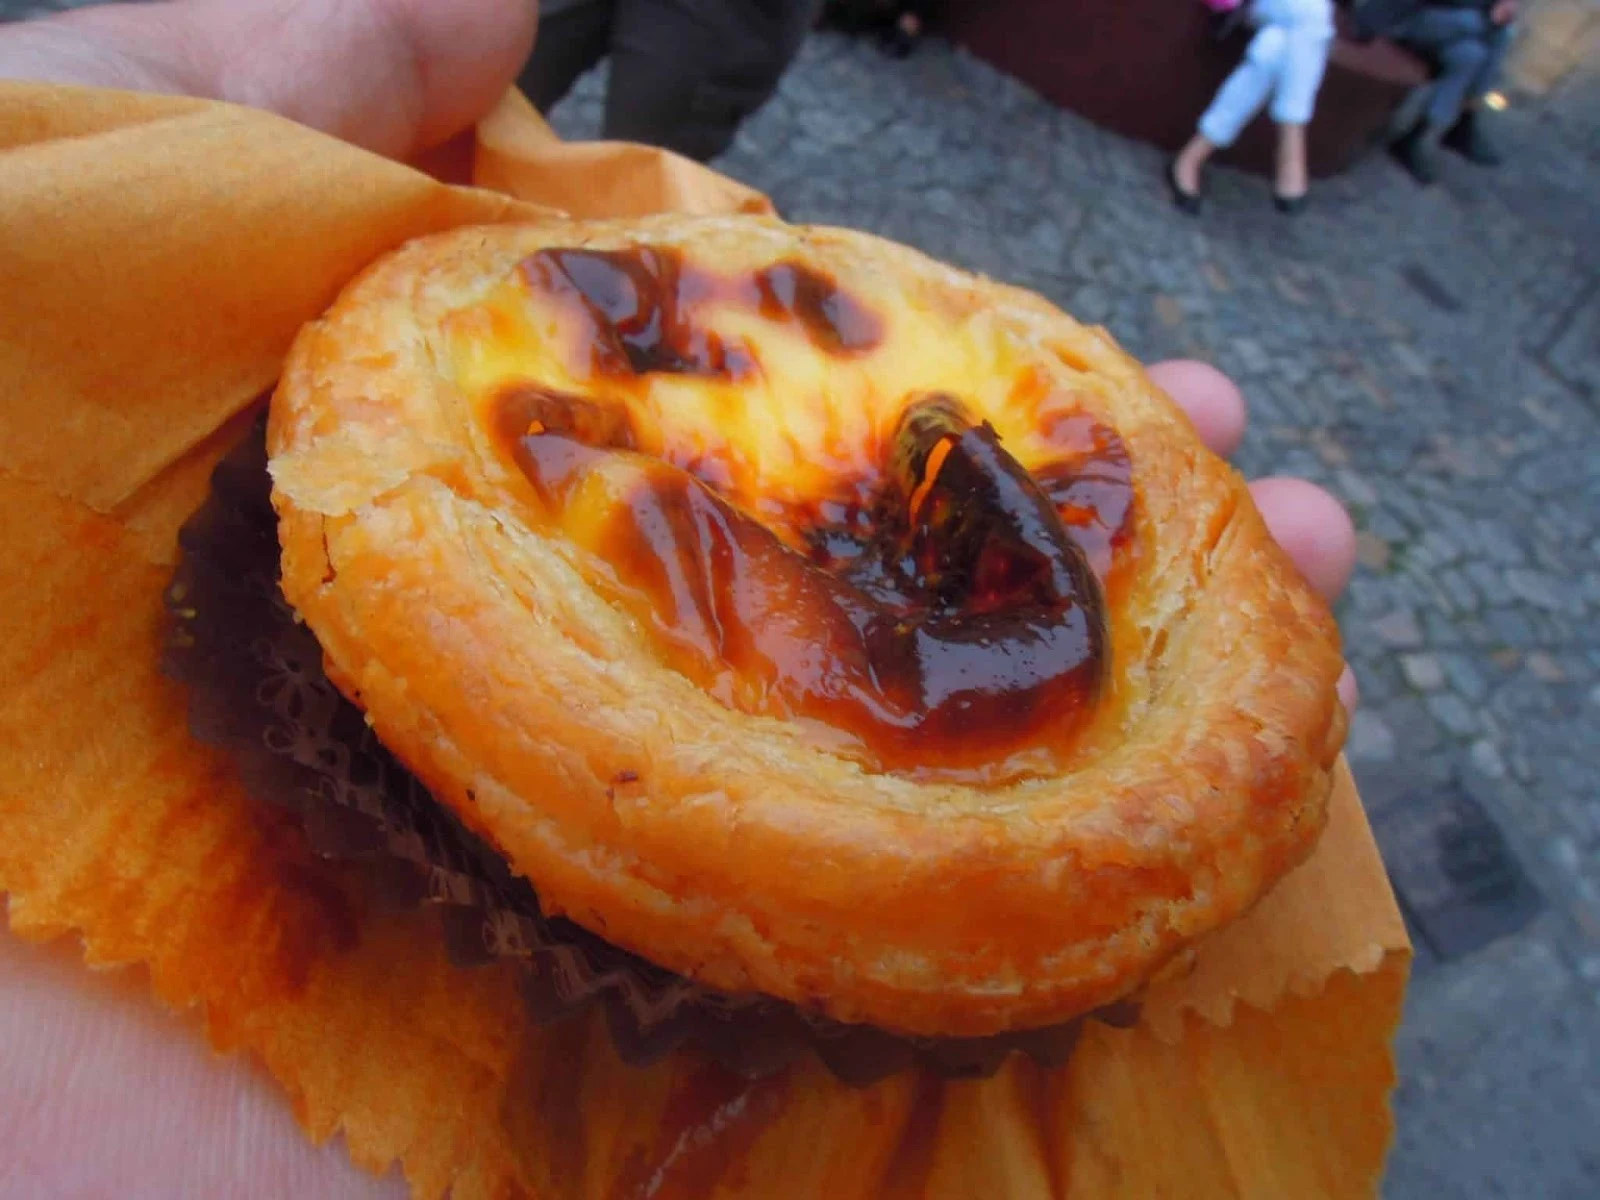 A close up photograph of an egg tart being sold in the streets in Macau